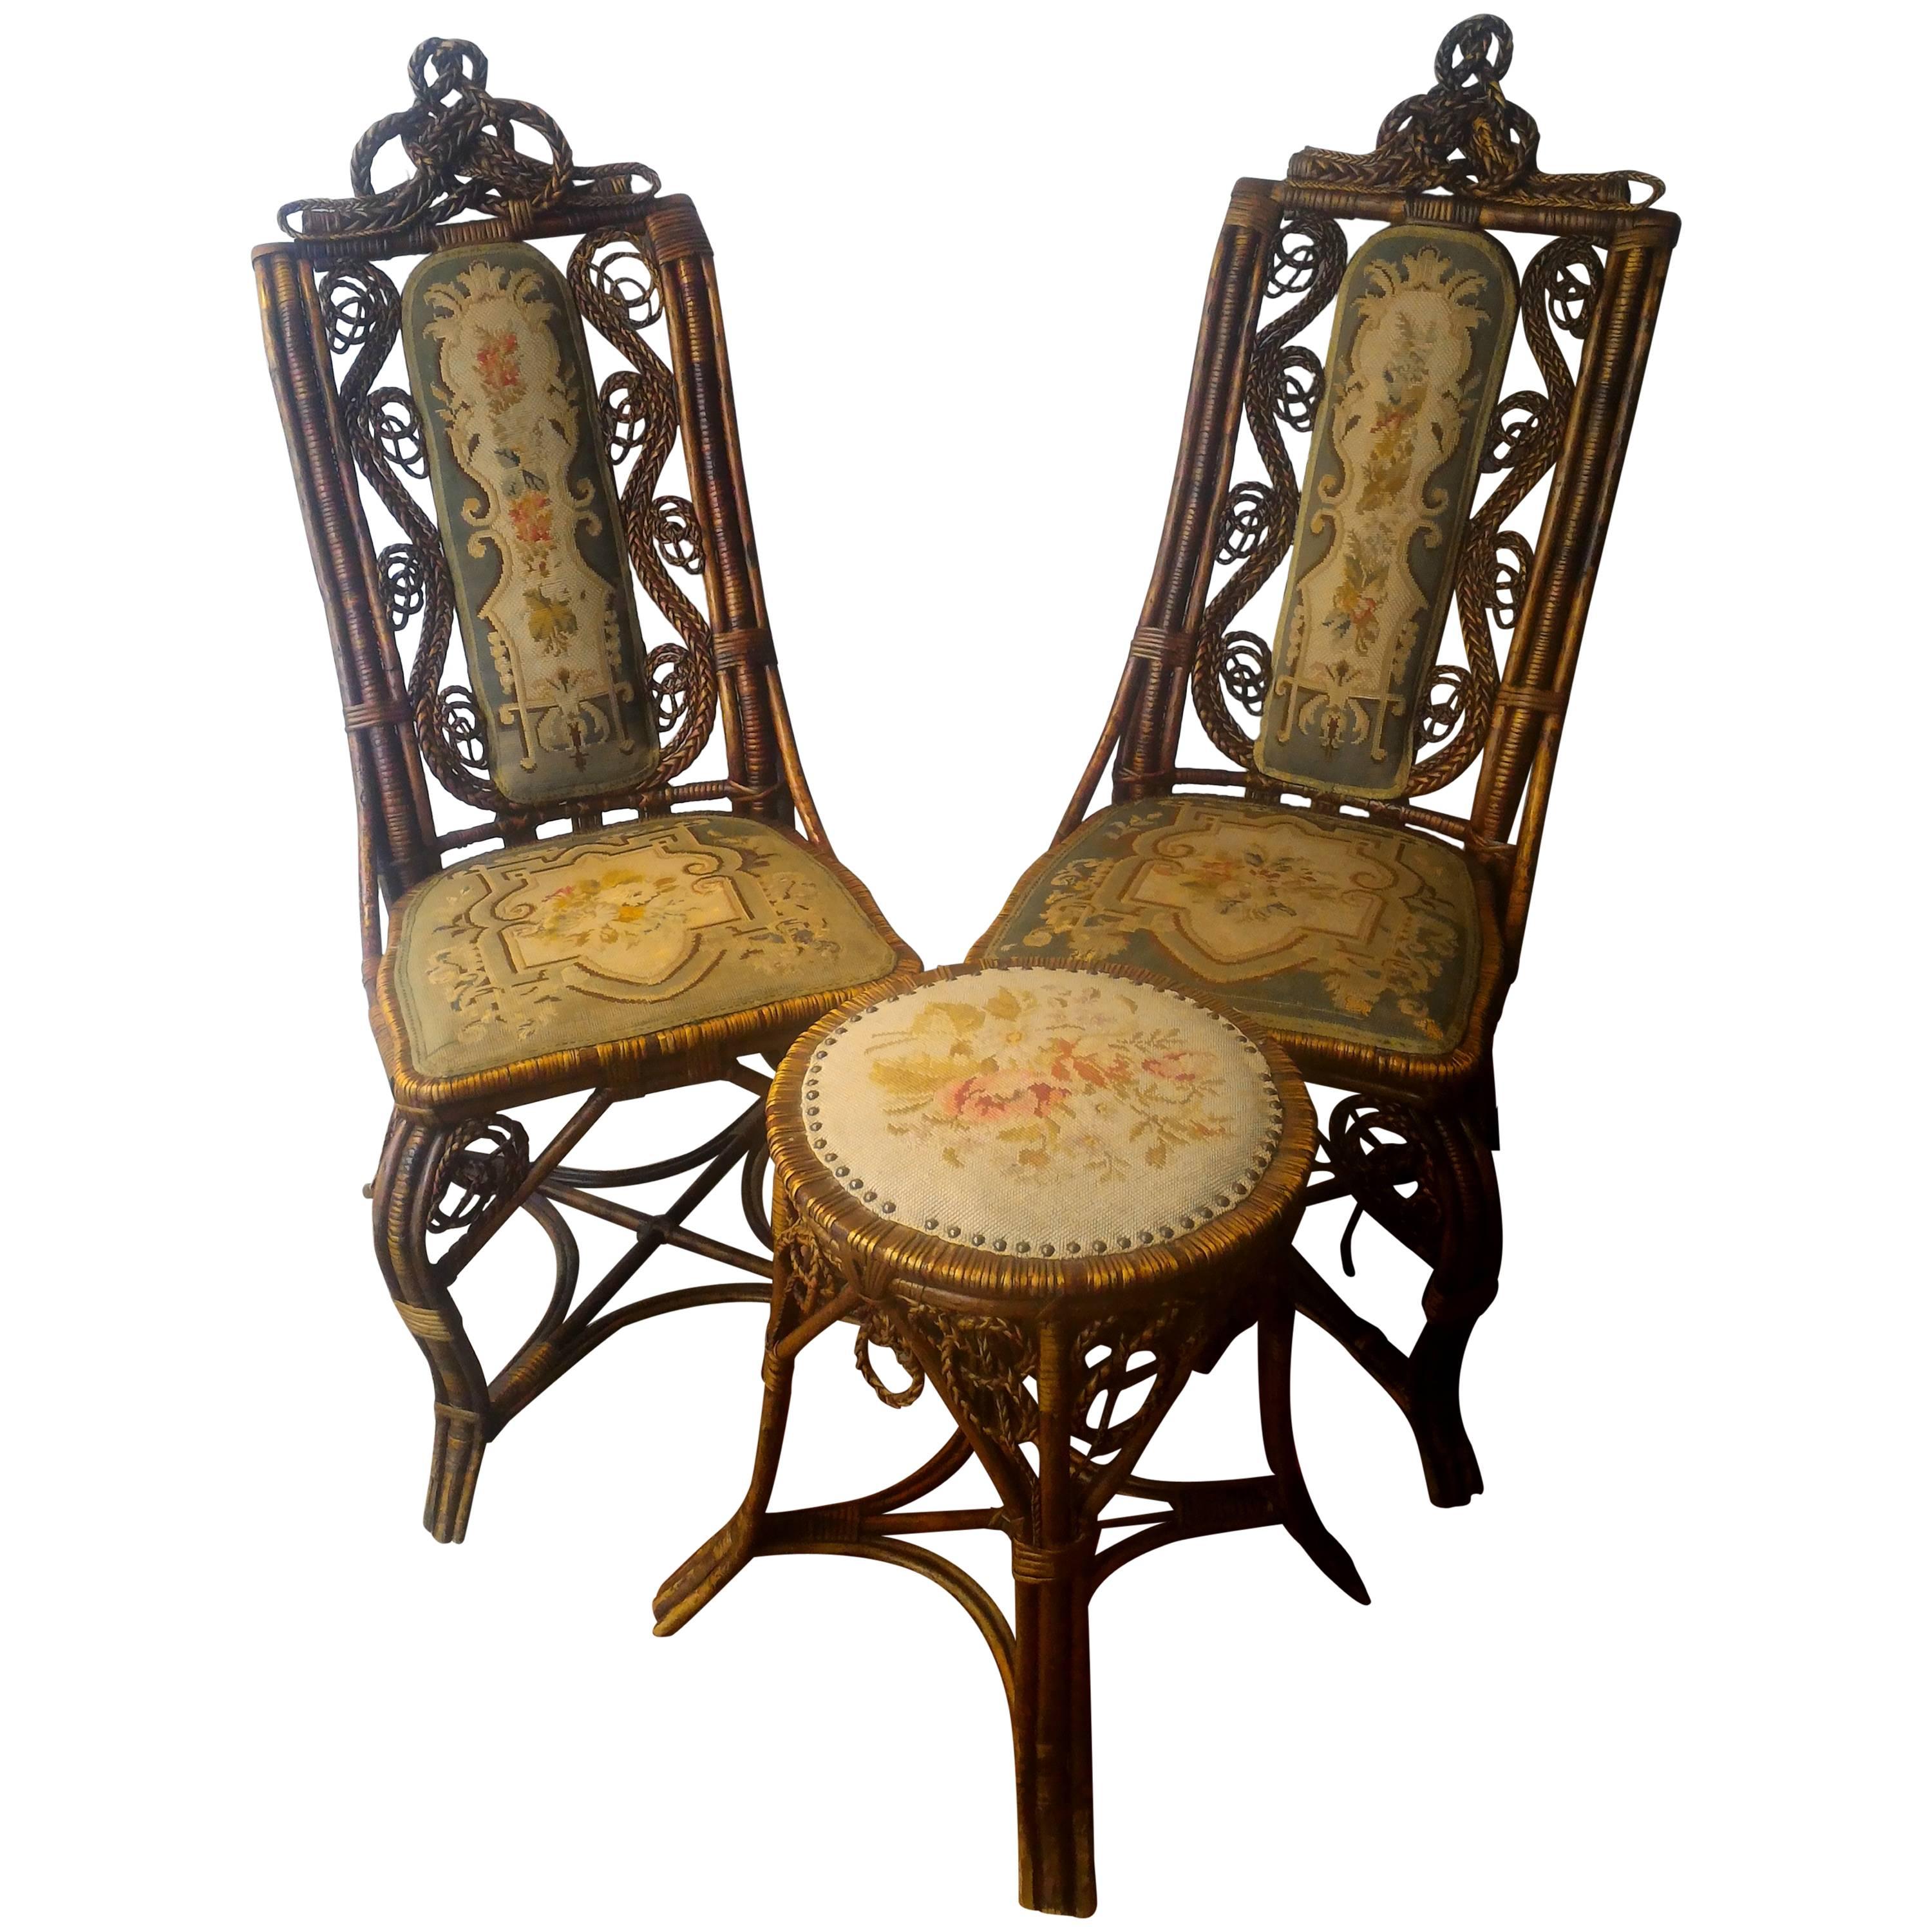 19th Century Black Forest Style, Pair of Large Chairs and Stool with Tapestry